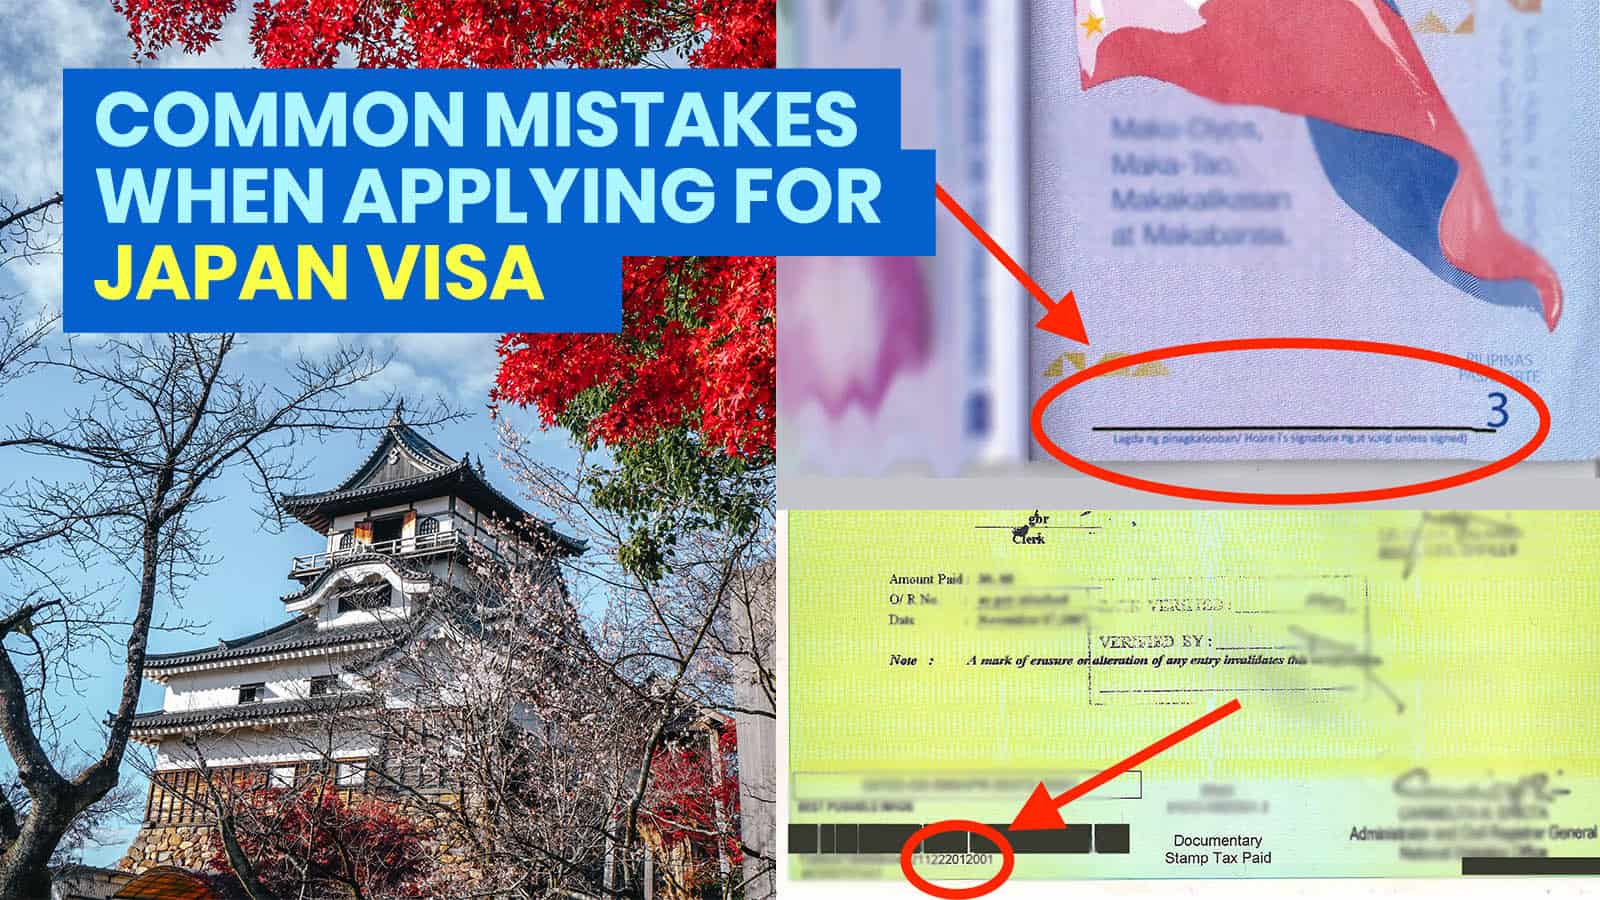 Avoid These 12 COMMON MISTAKES when Applying for a JAPAN VISA! | The